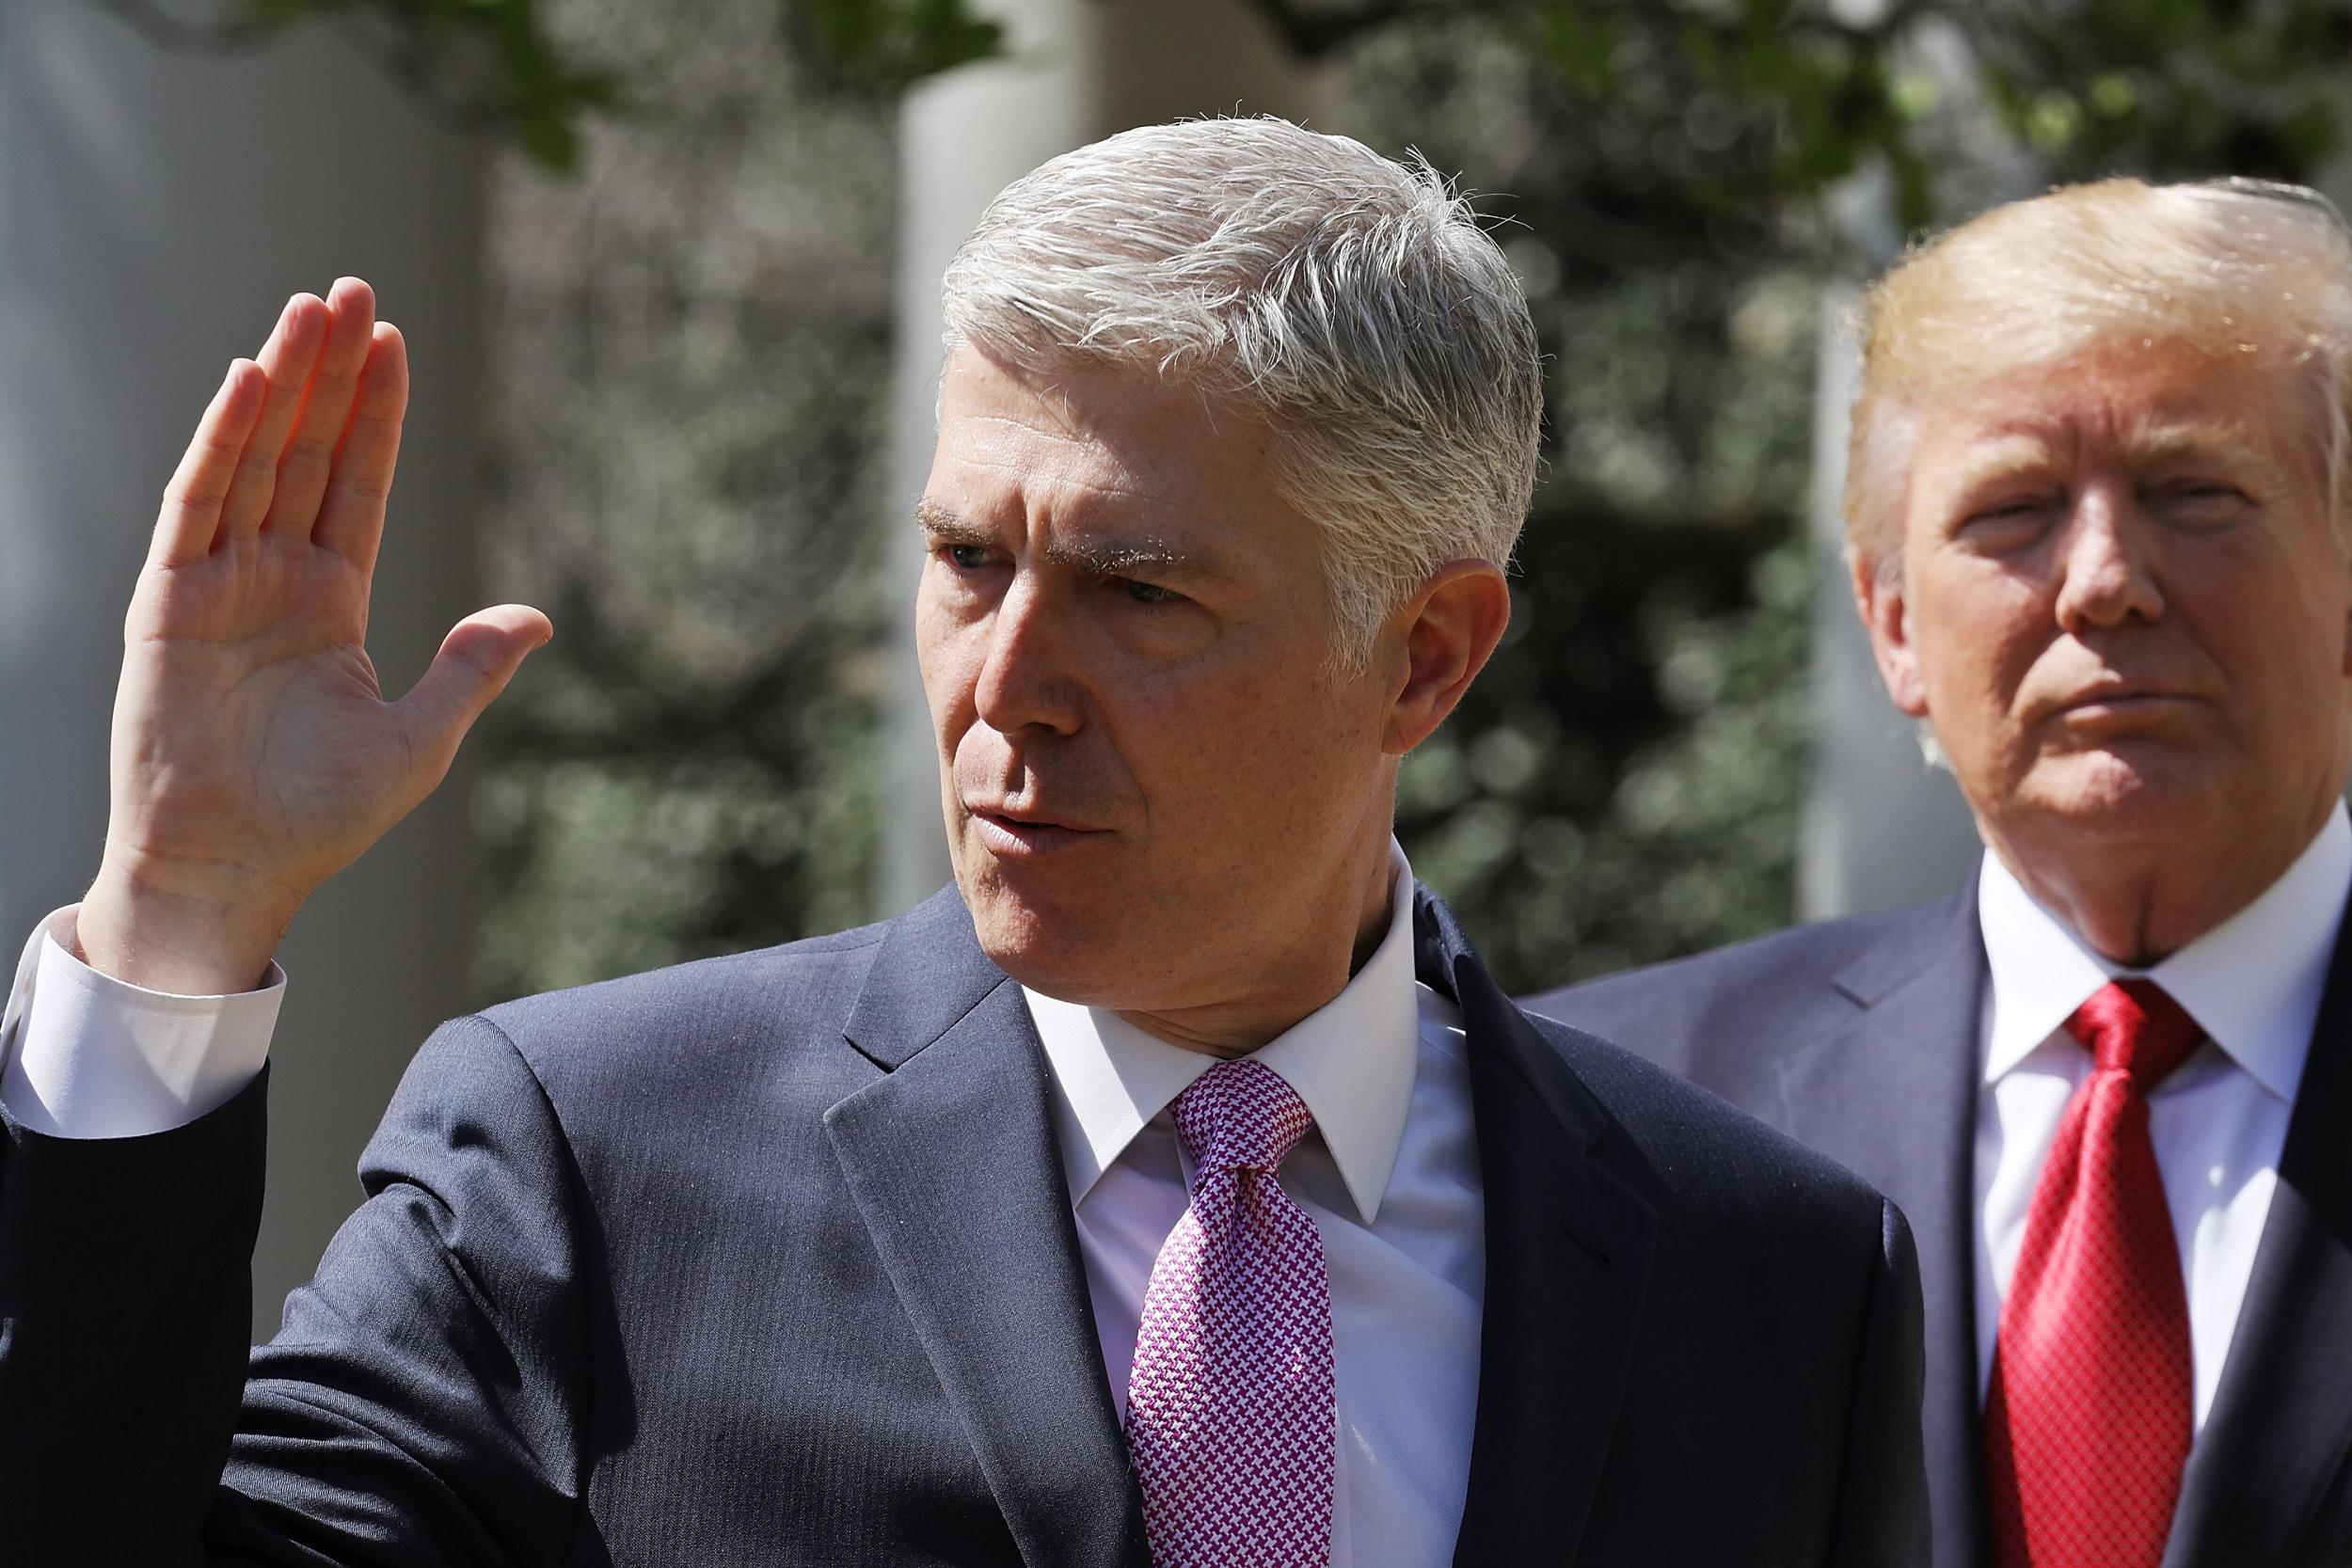 U.S. Supreme Court Associate Justice Judge Neil Gorsuch takes the judicial oath as President Donald Trump looks on